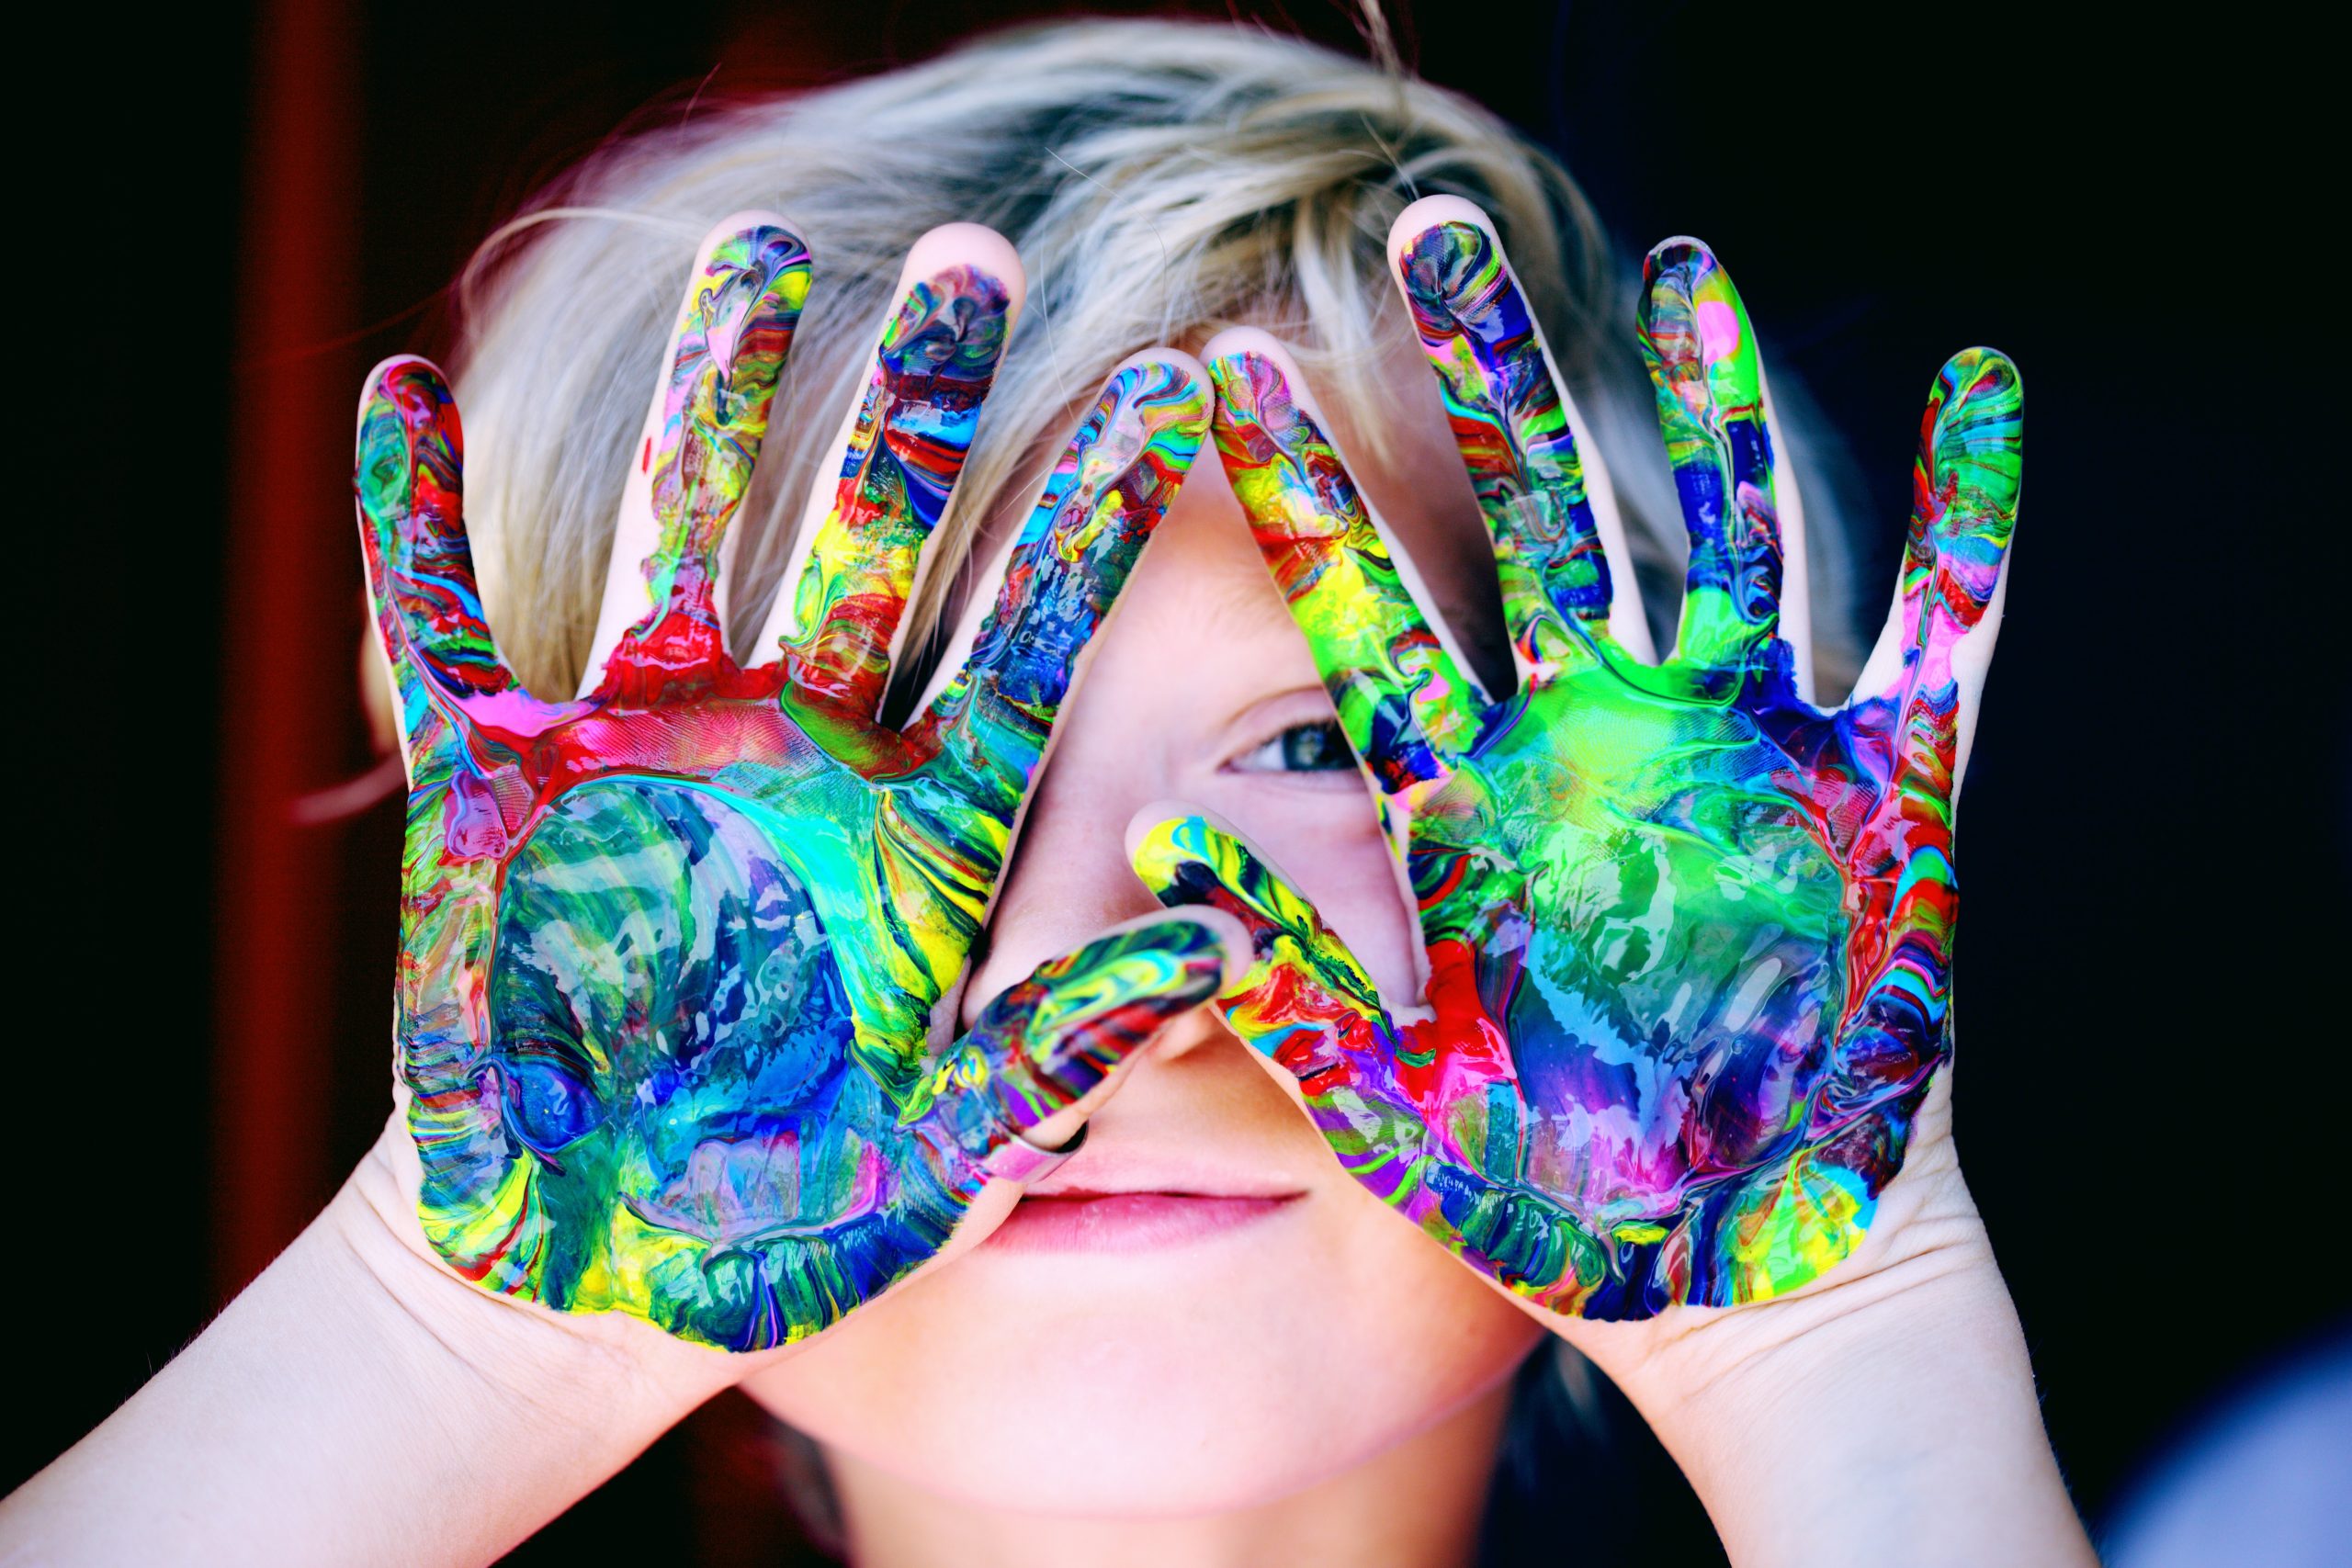 boy holding up painted hands in front of face